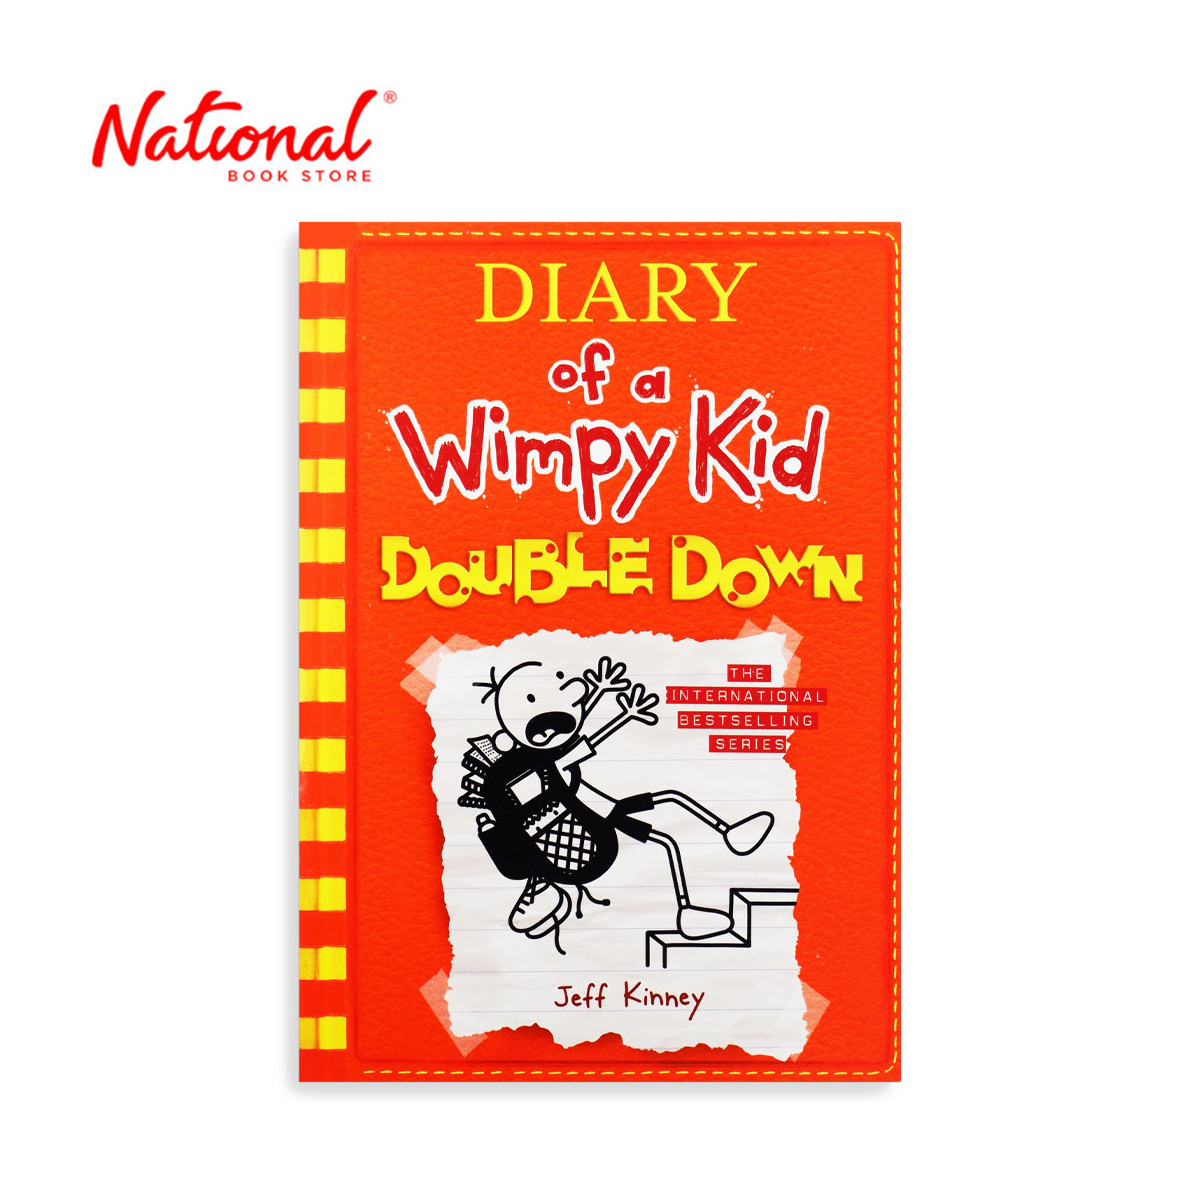 DIARY OF A WIMPY KID11 DOUBLE DOWN